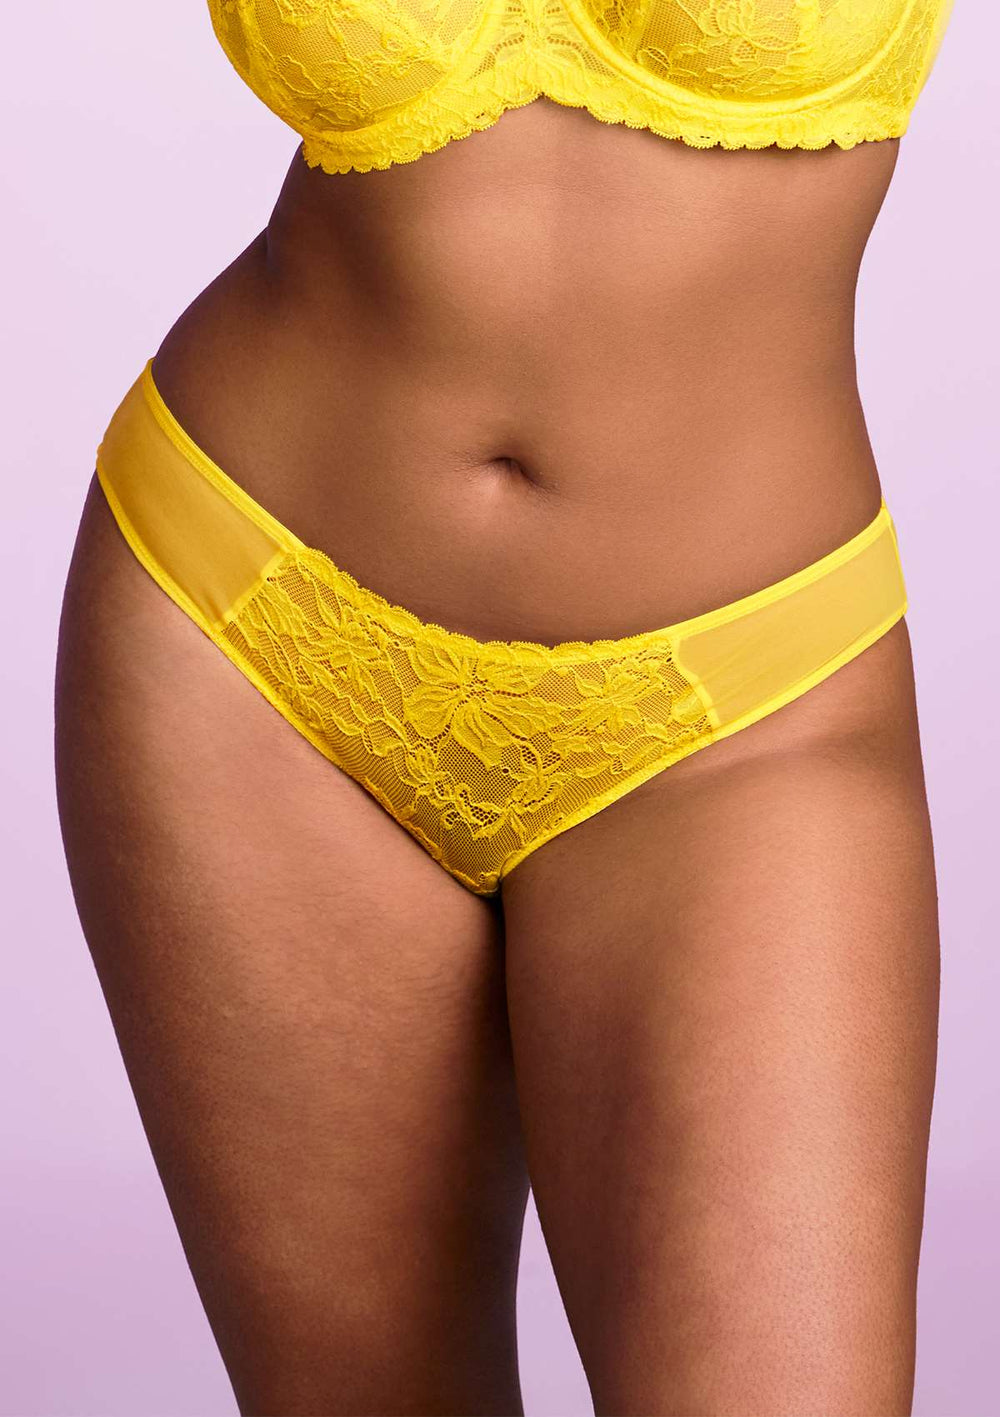 Lace panties. The sexy panty isolated on the yellow background